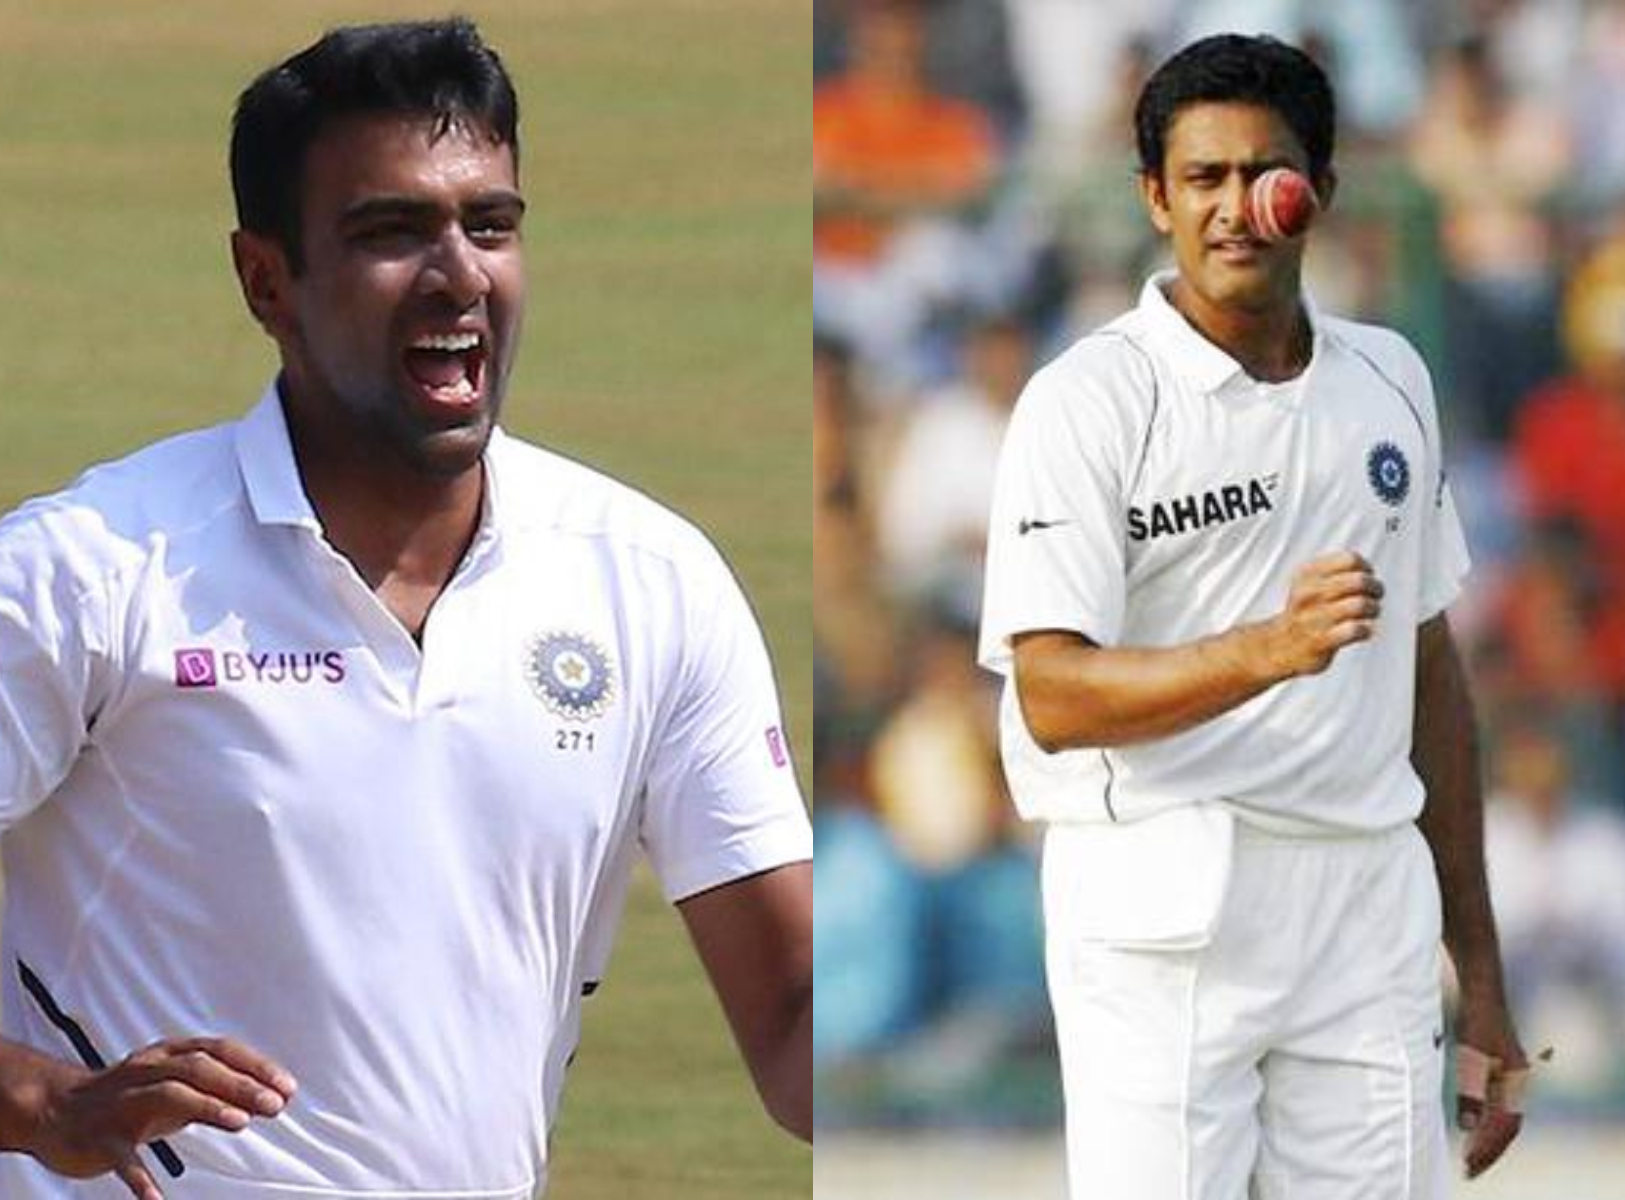 R Ashwin and Anil Kumble- spinners par excellence